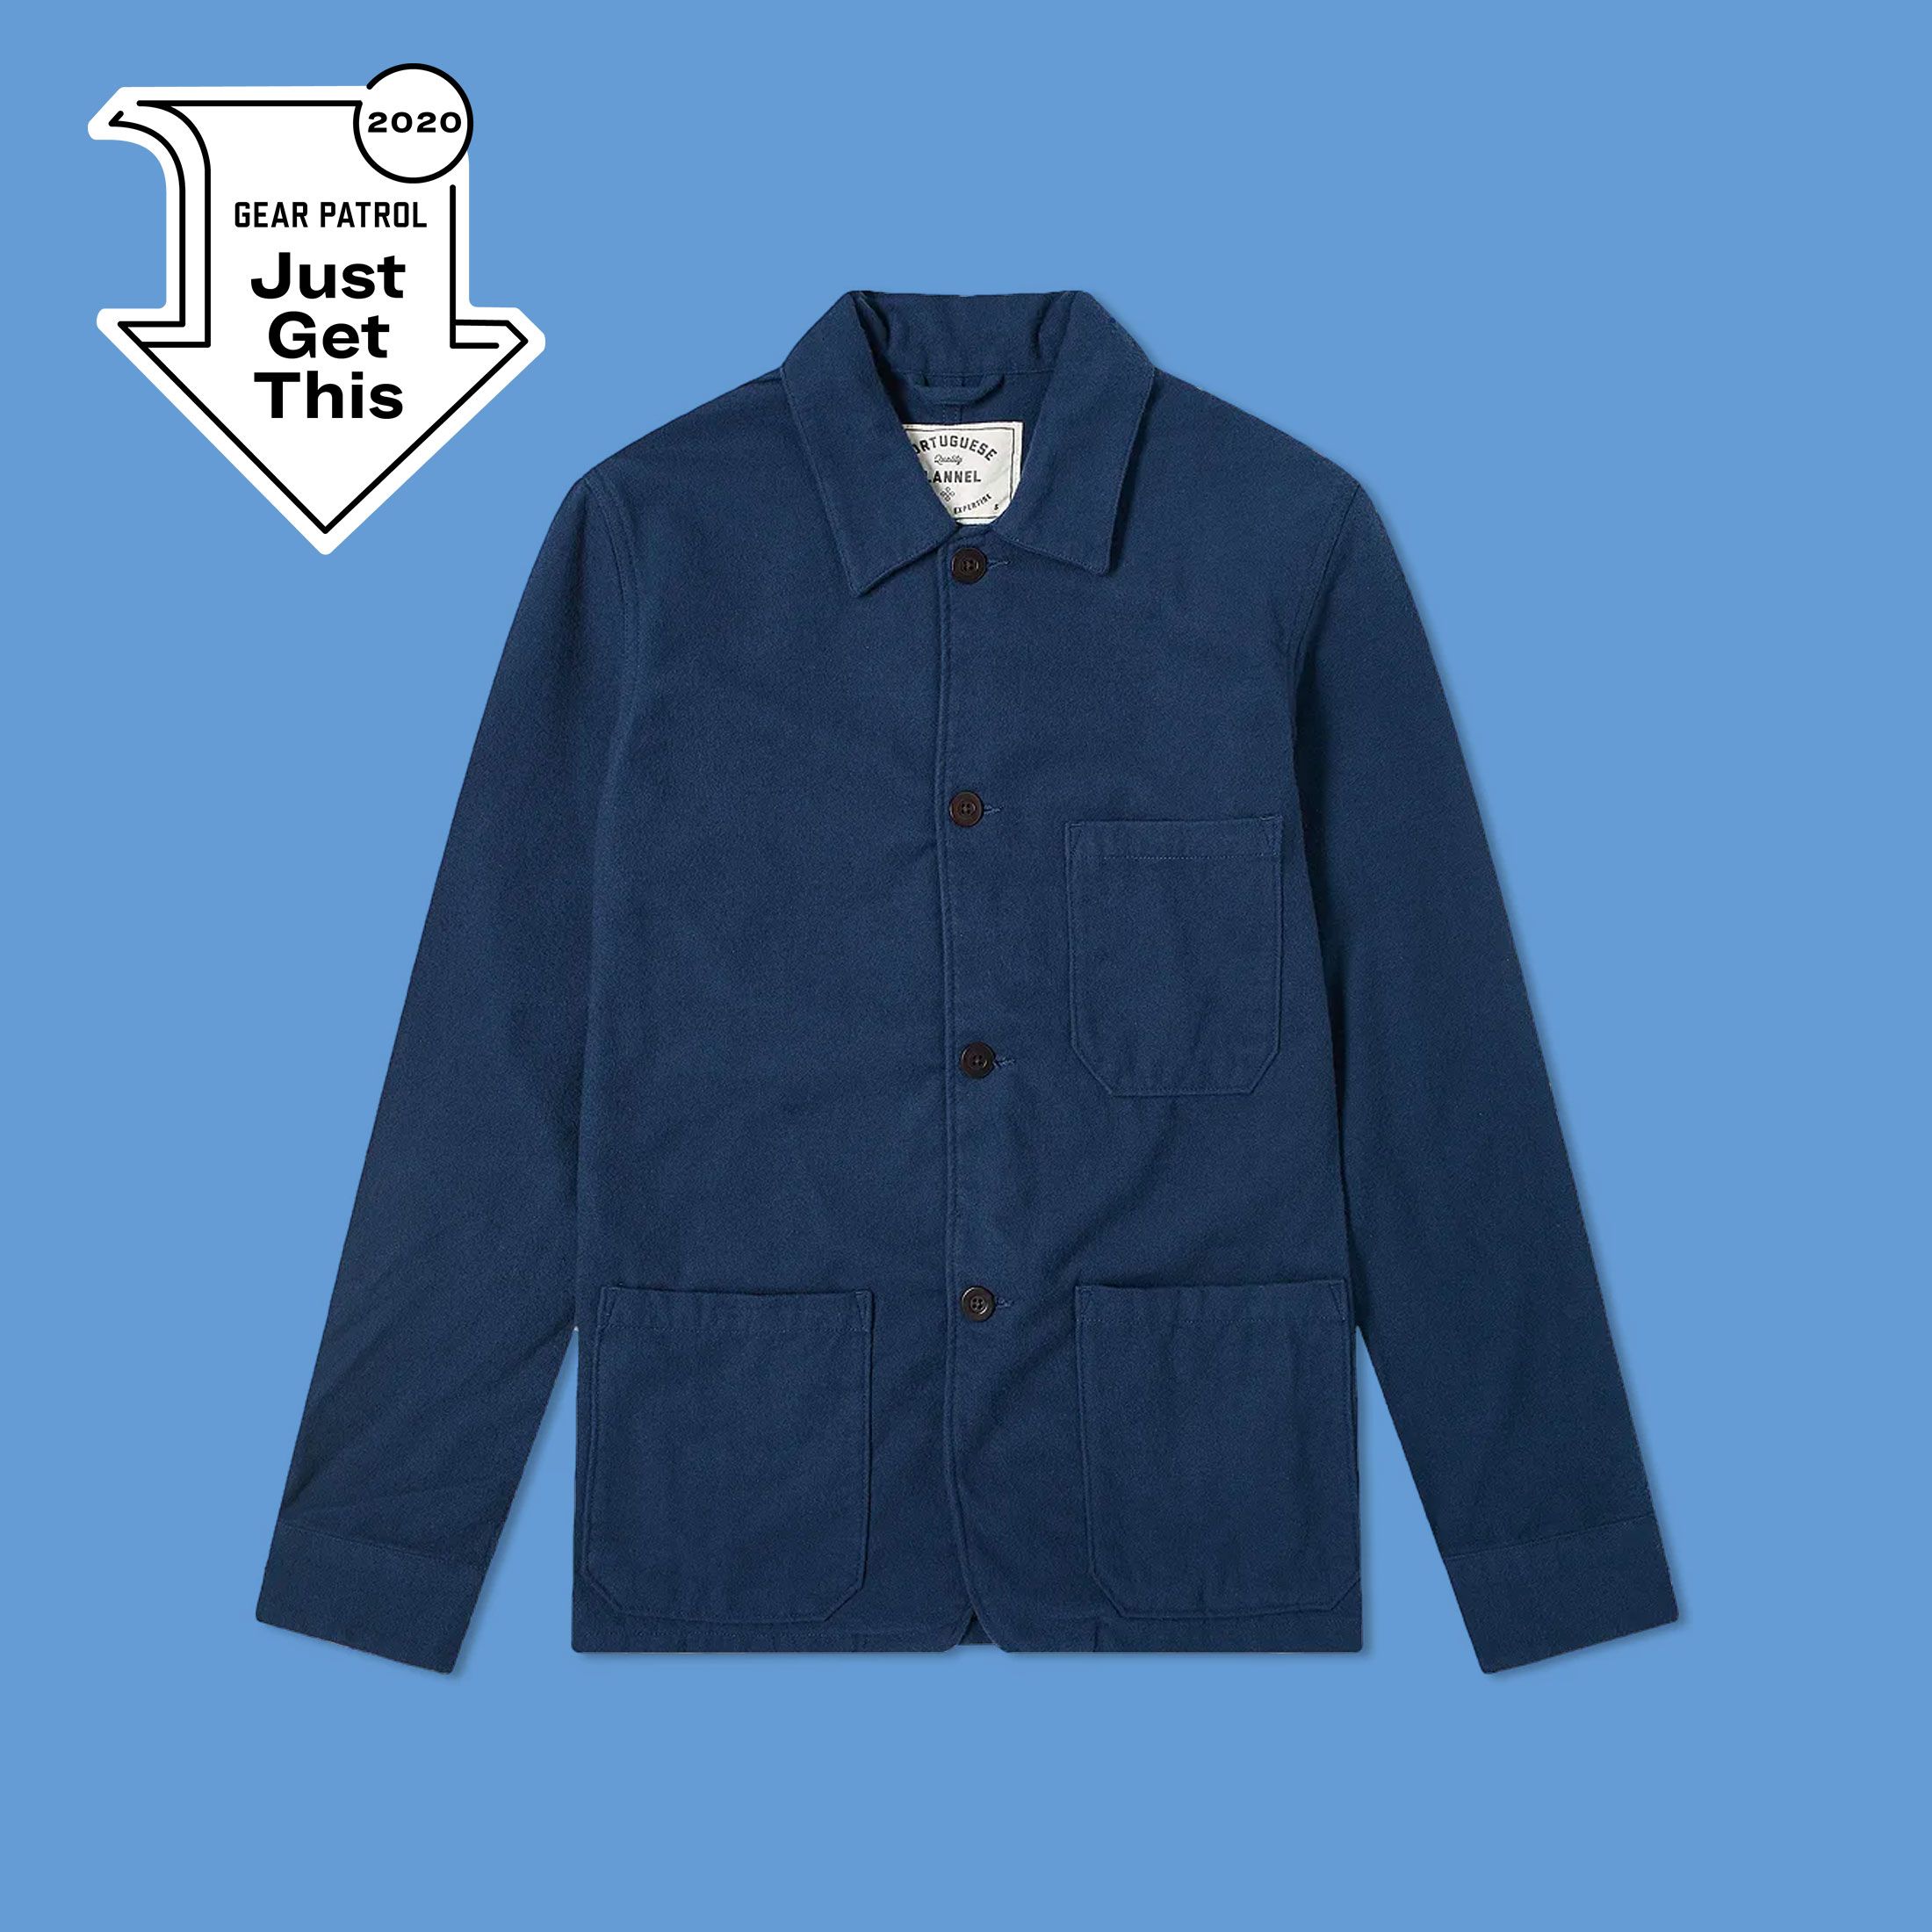 This Best Overall Chore Coat Is Now On Sale Save 30 Today